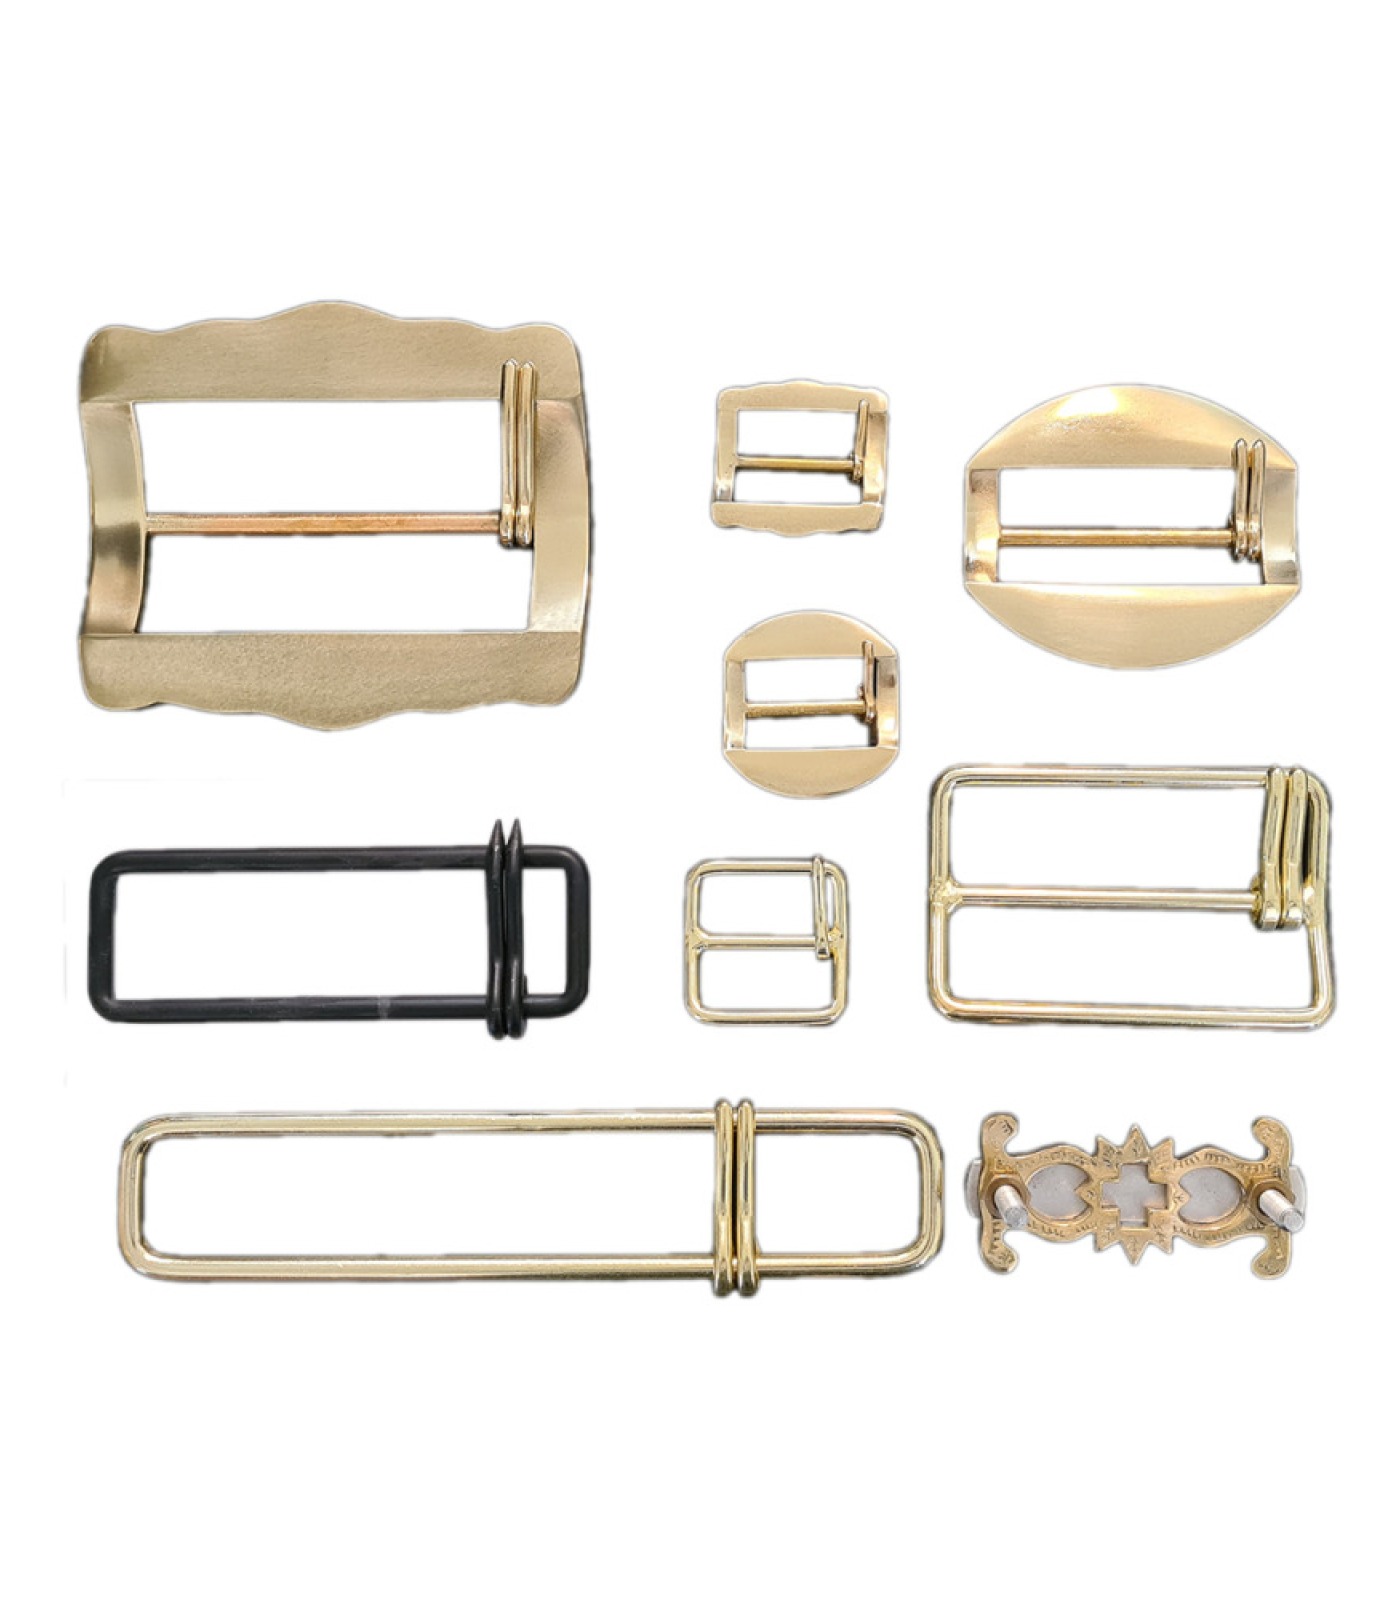 Bell strap buckles, brass and iron